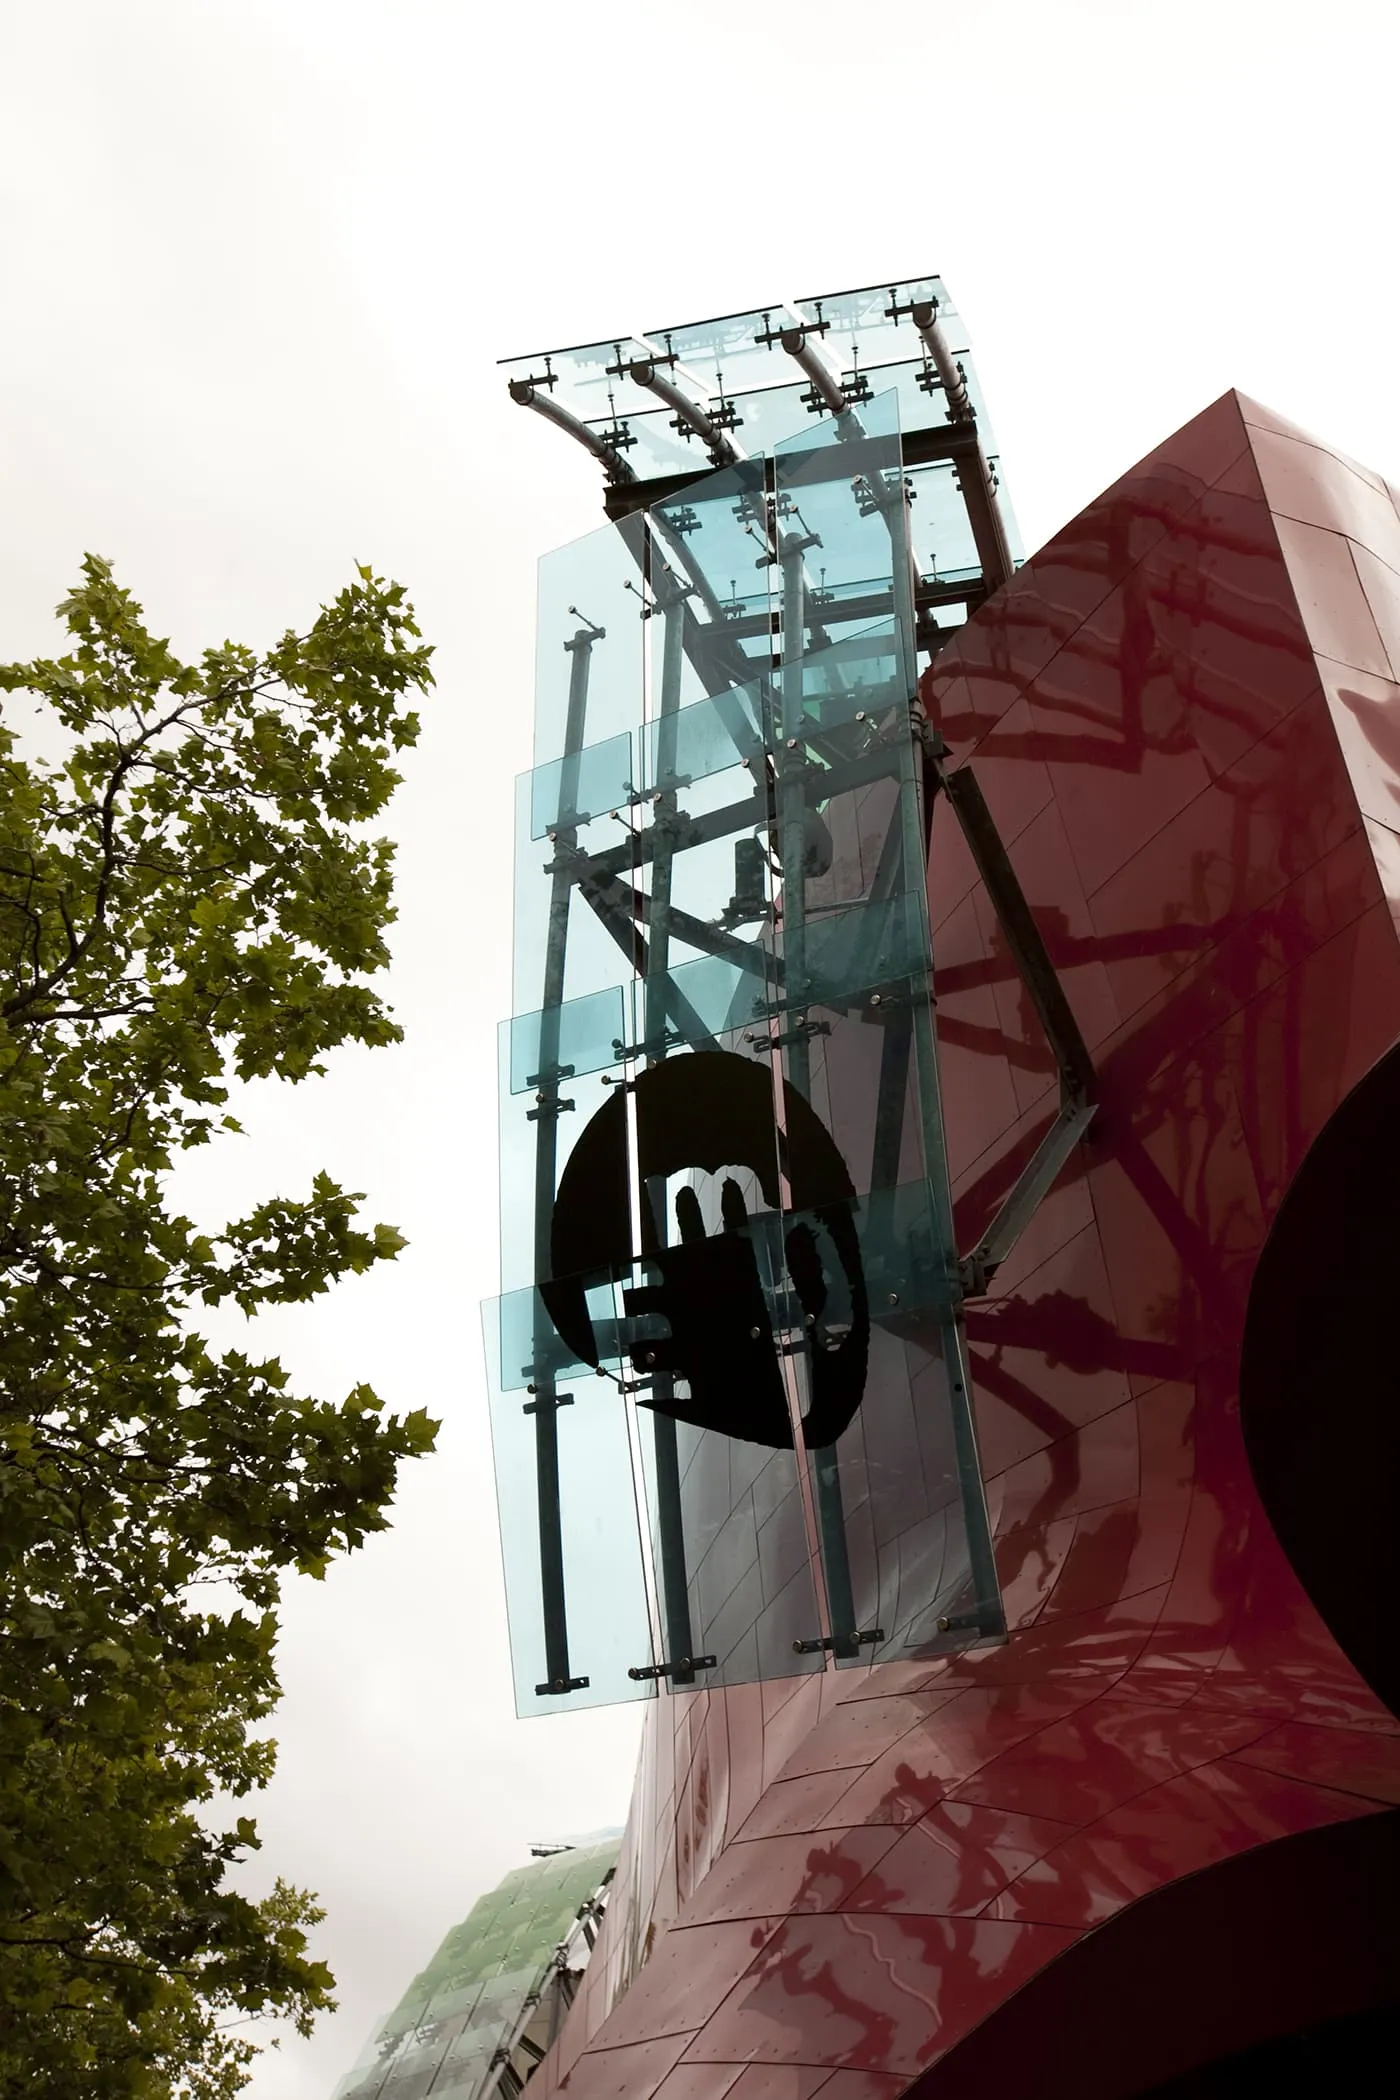 Experience Music Project (EMP) in Seattle, Washington